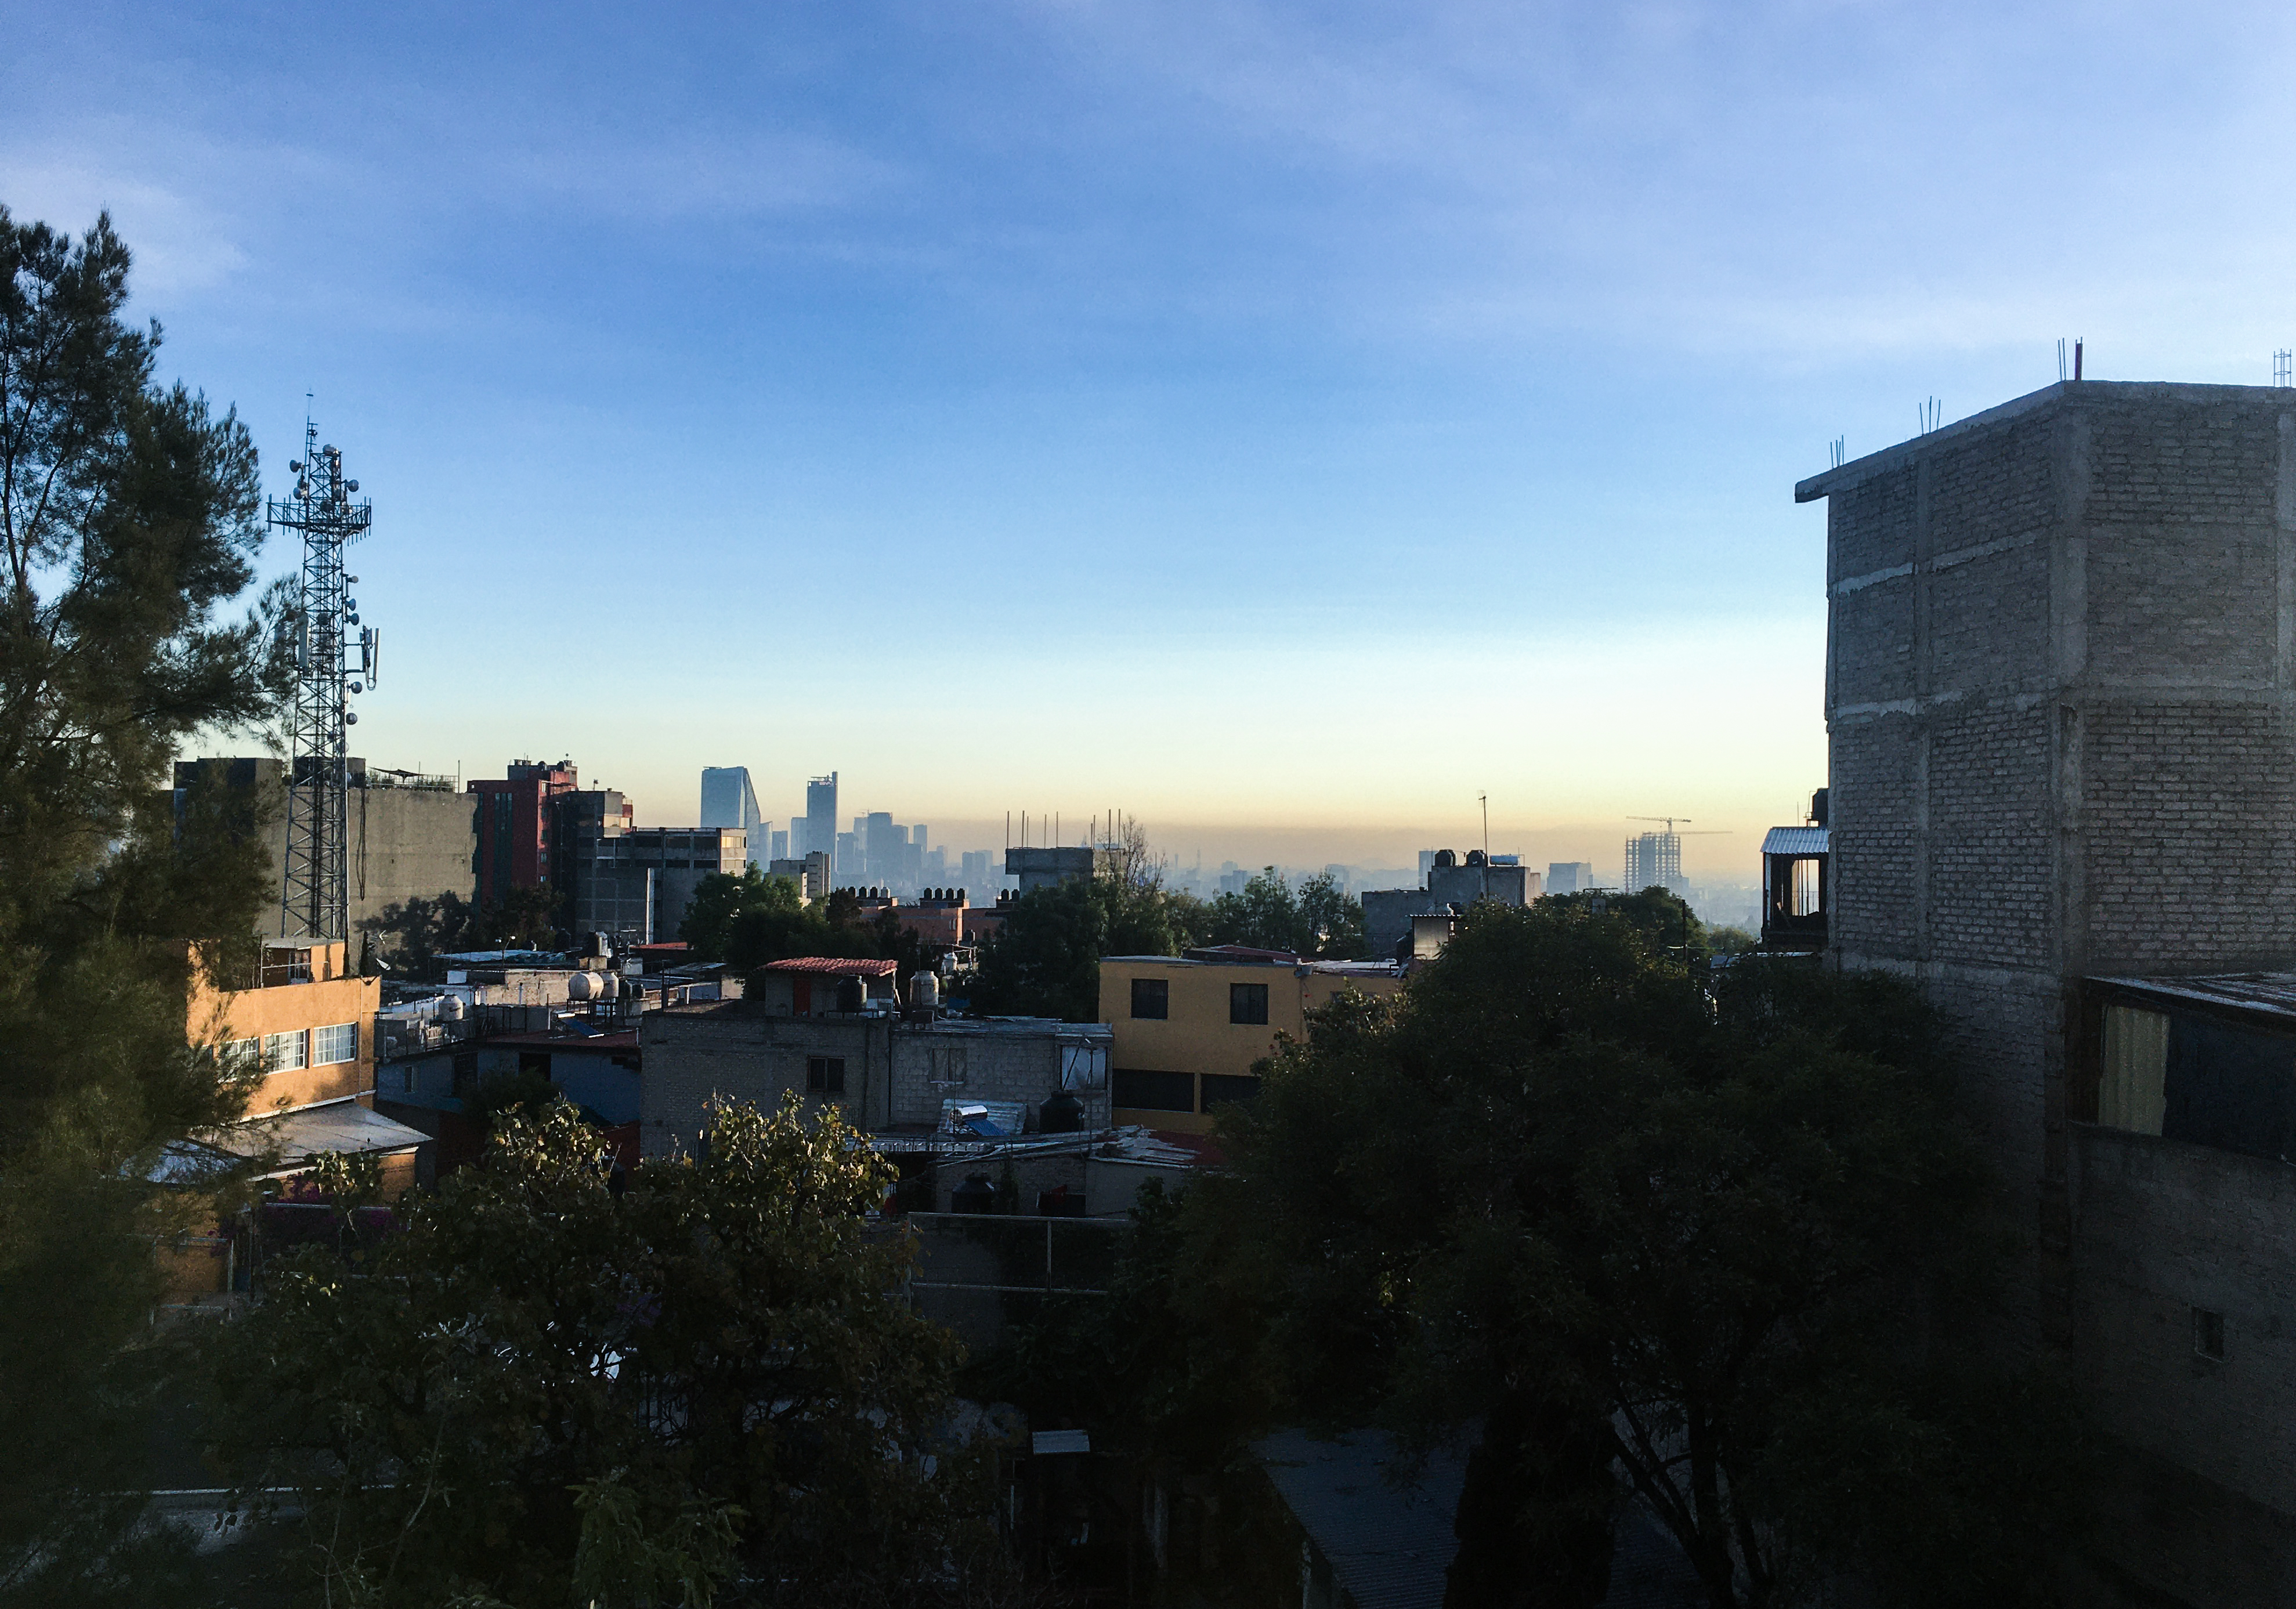 Mexico City as seen from the western hillsides